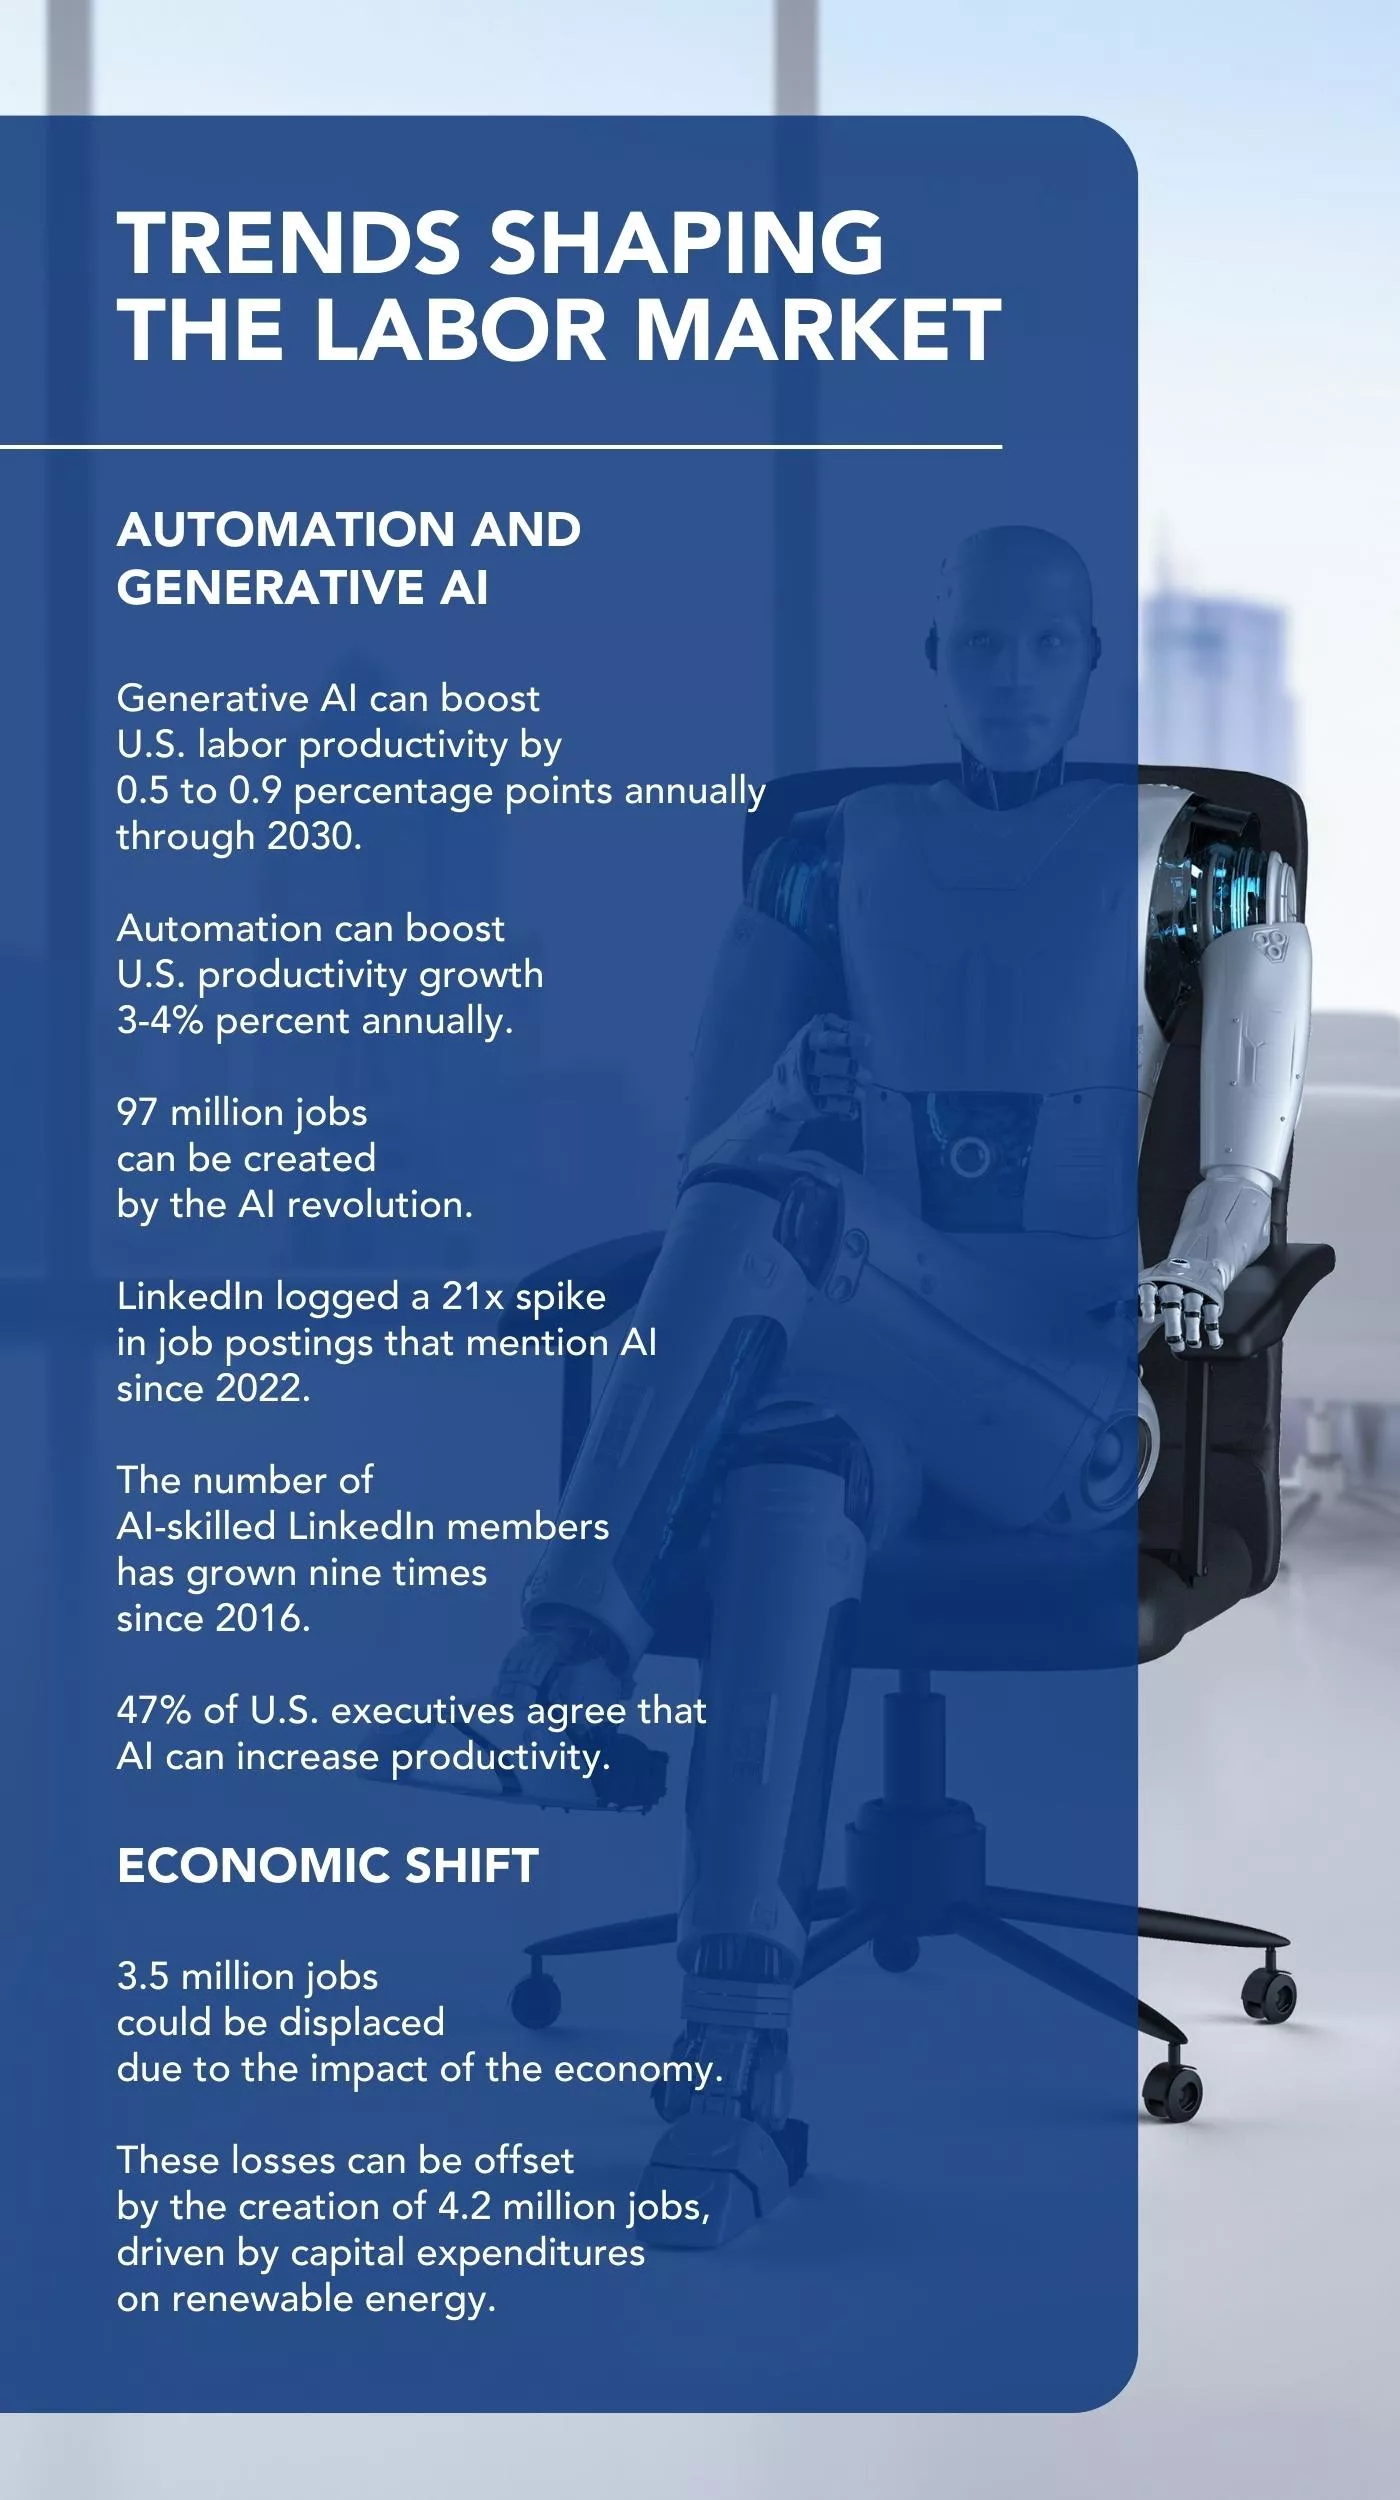 An infographic shows how Automation and Generative AI shape HR outsourcing trends of today.